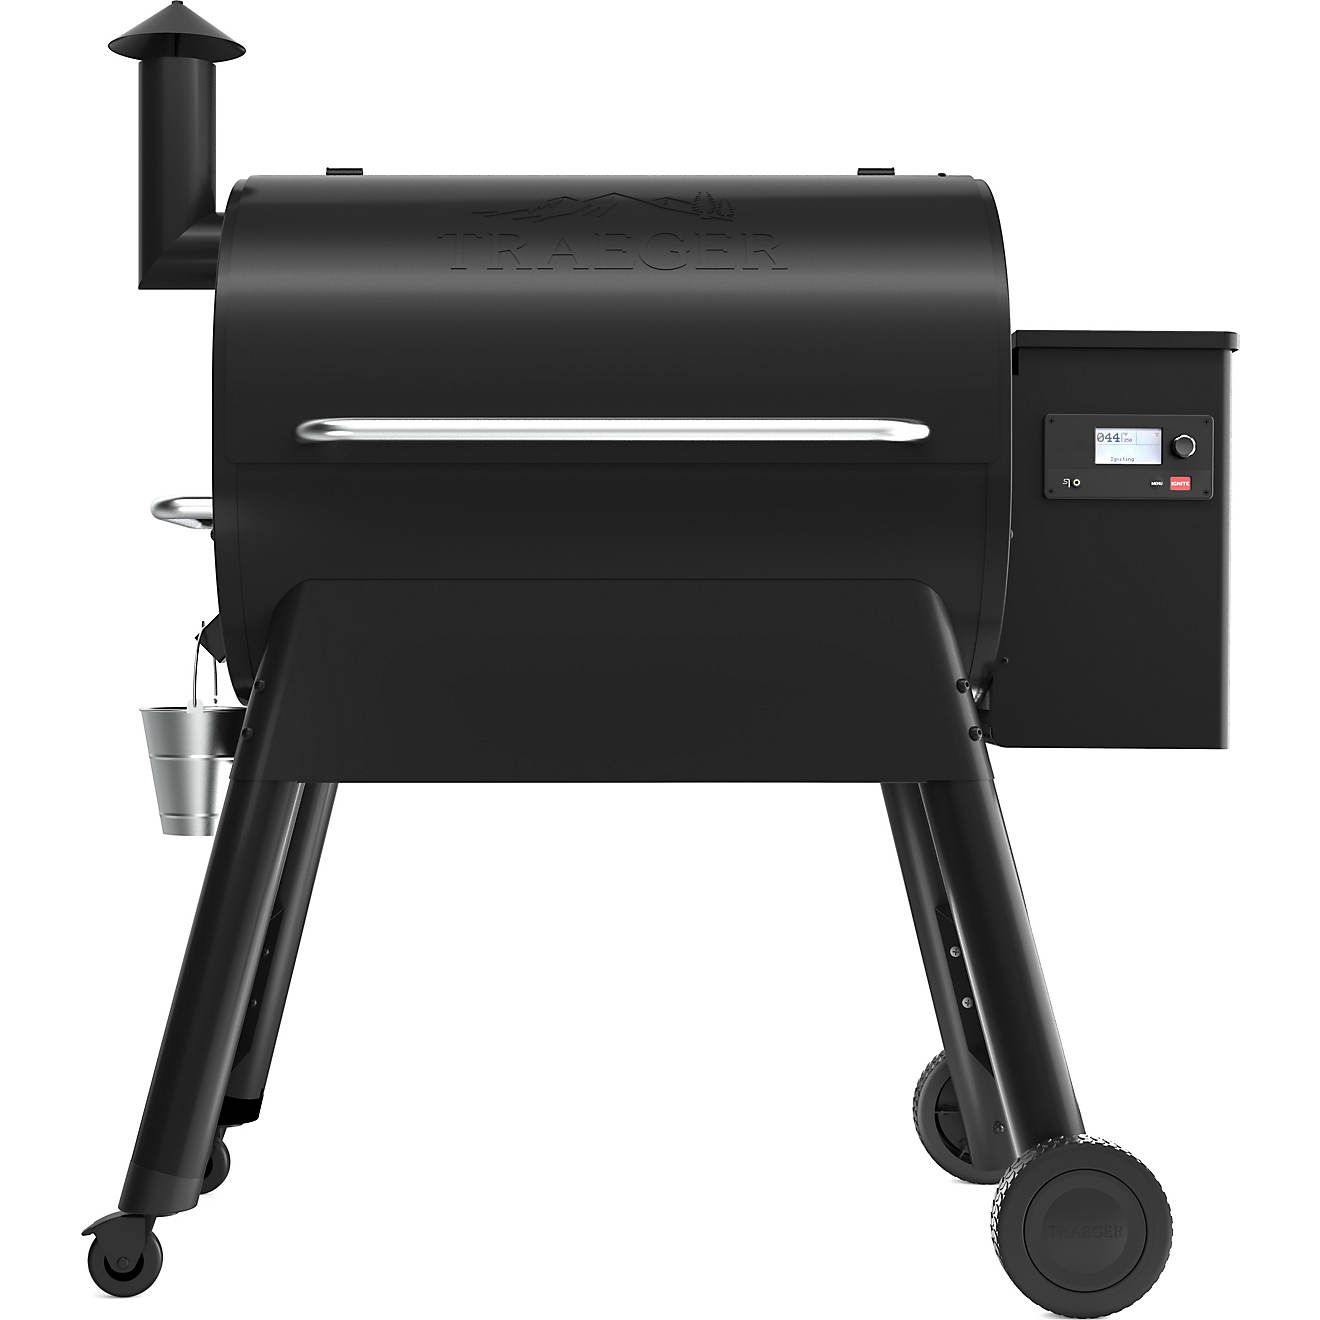 Traeger Pro 780 Pellet Grill | Academy Sports + Outdoor Affiliate